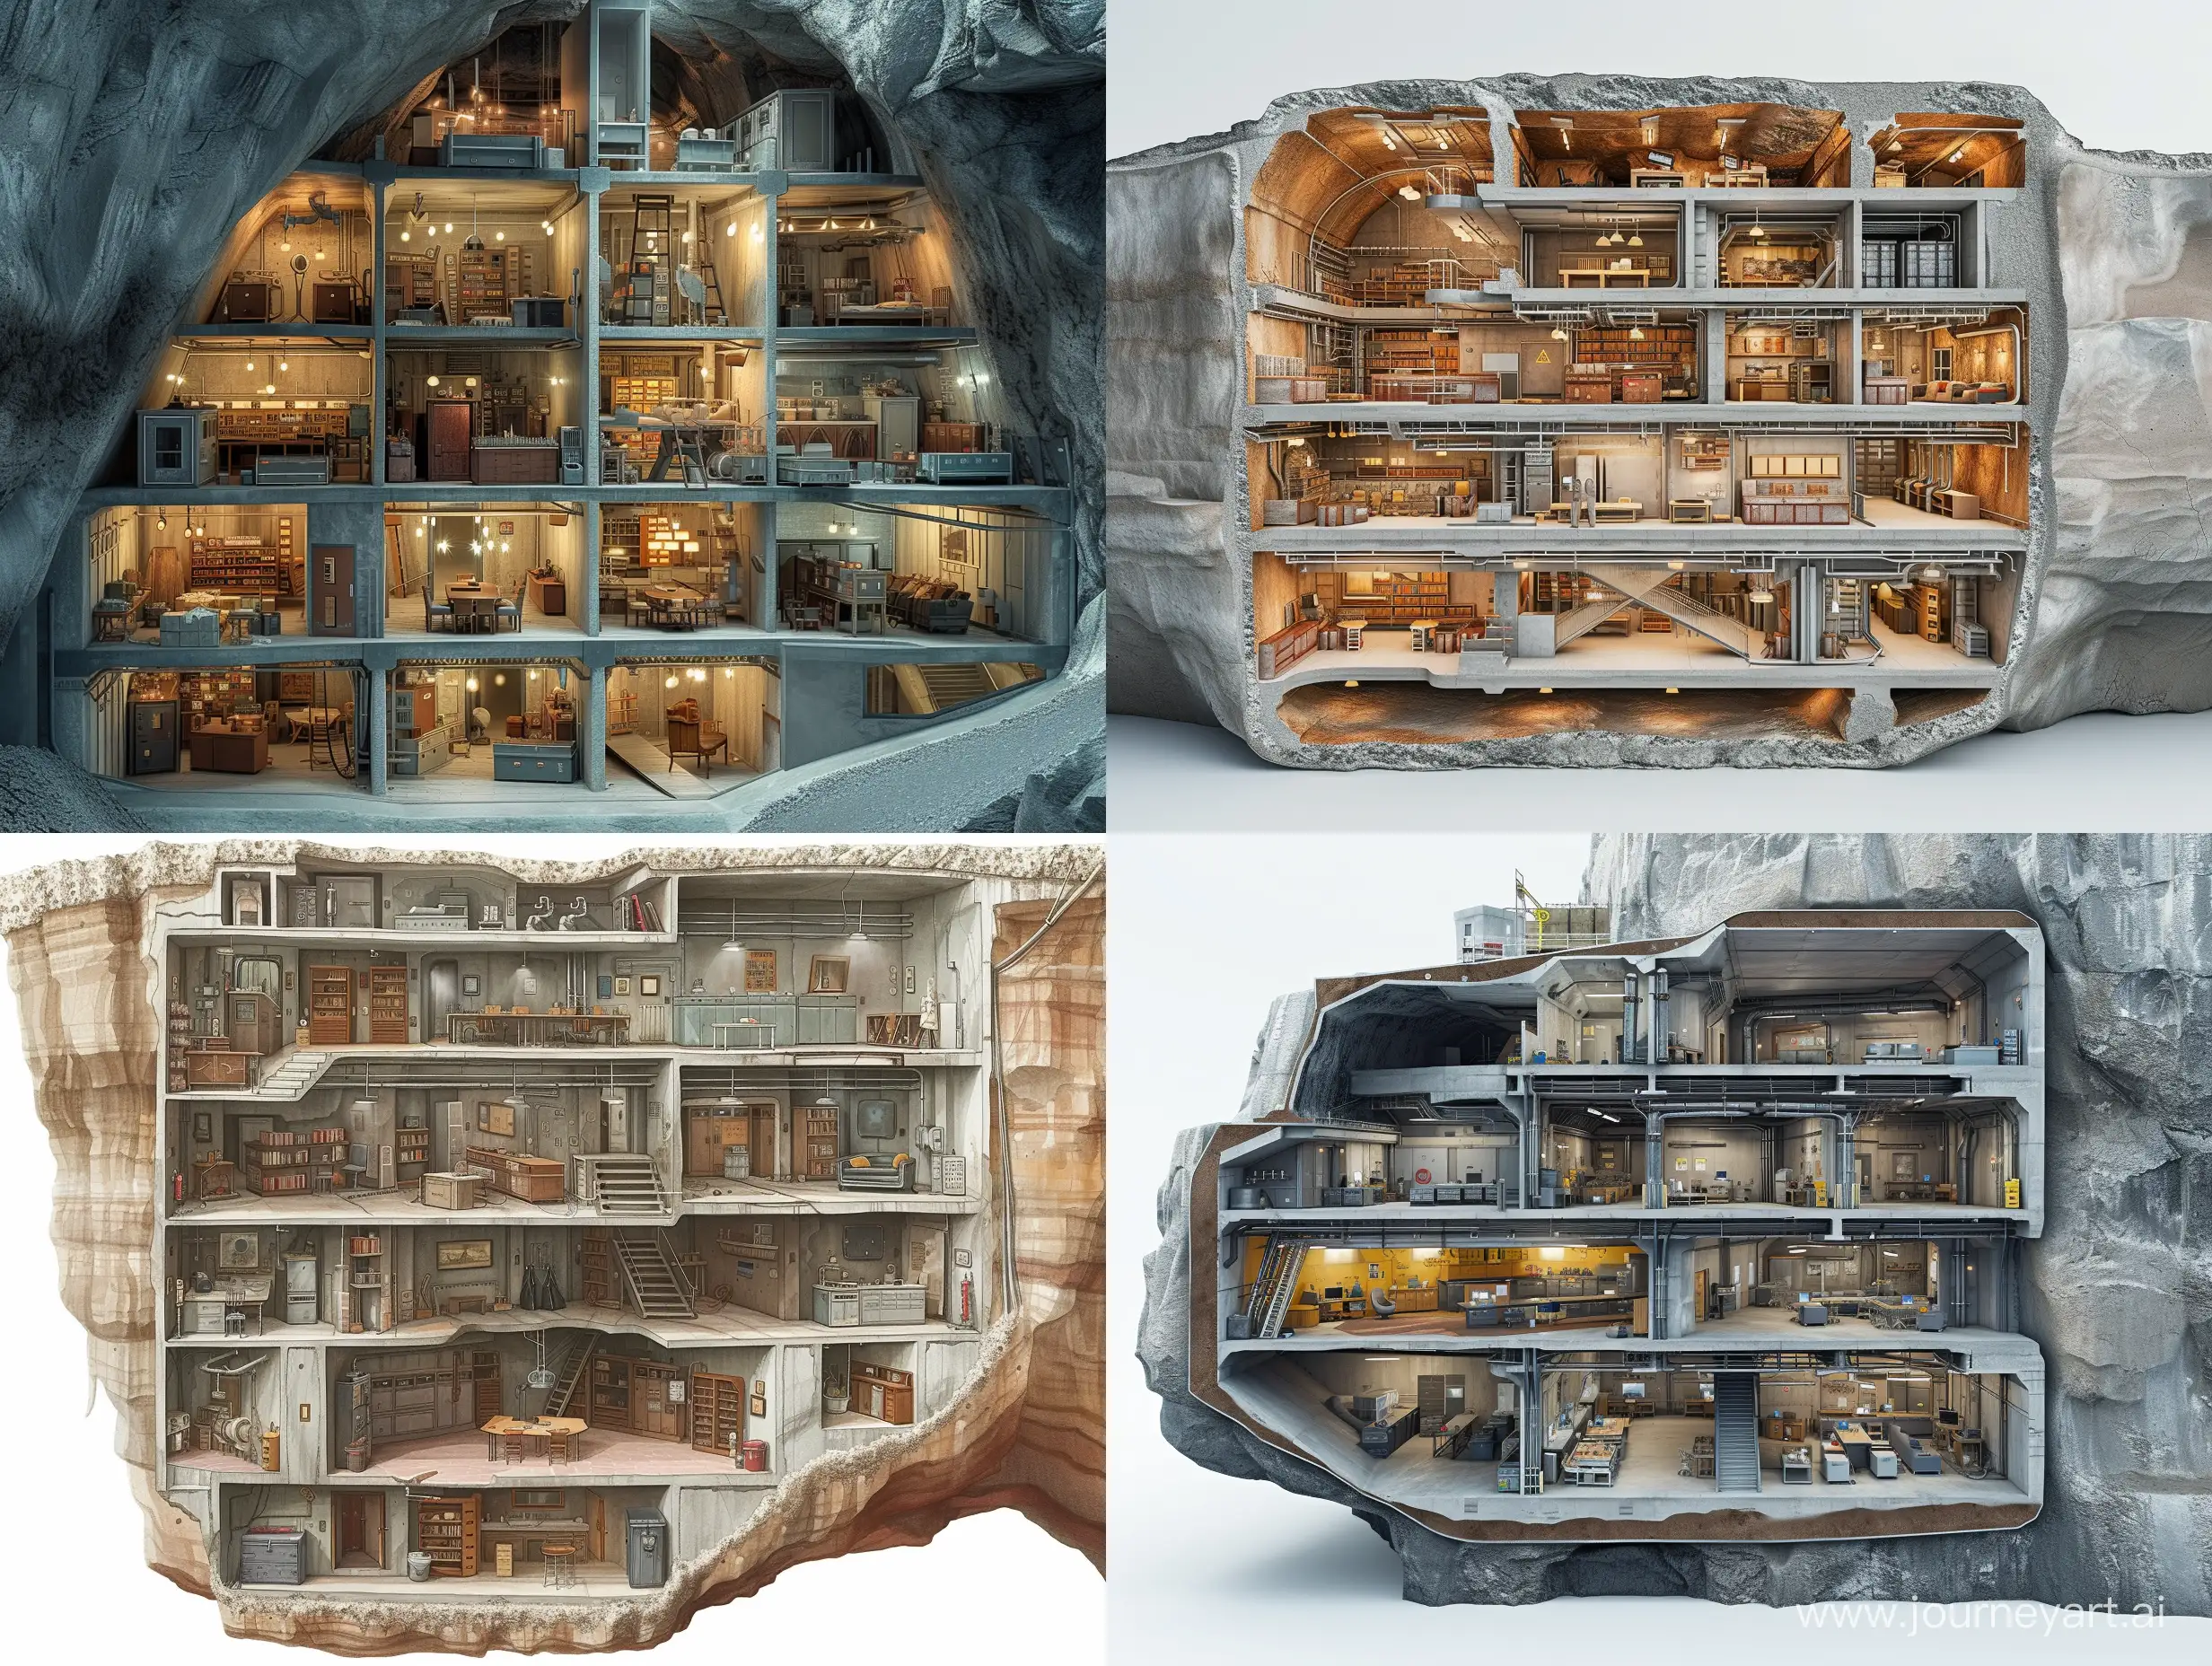 Liminal-Back-Rooms-Complex-A-Fascinating-Cutaway-View-Underground